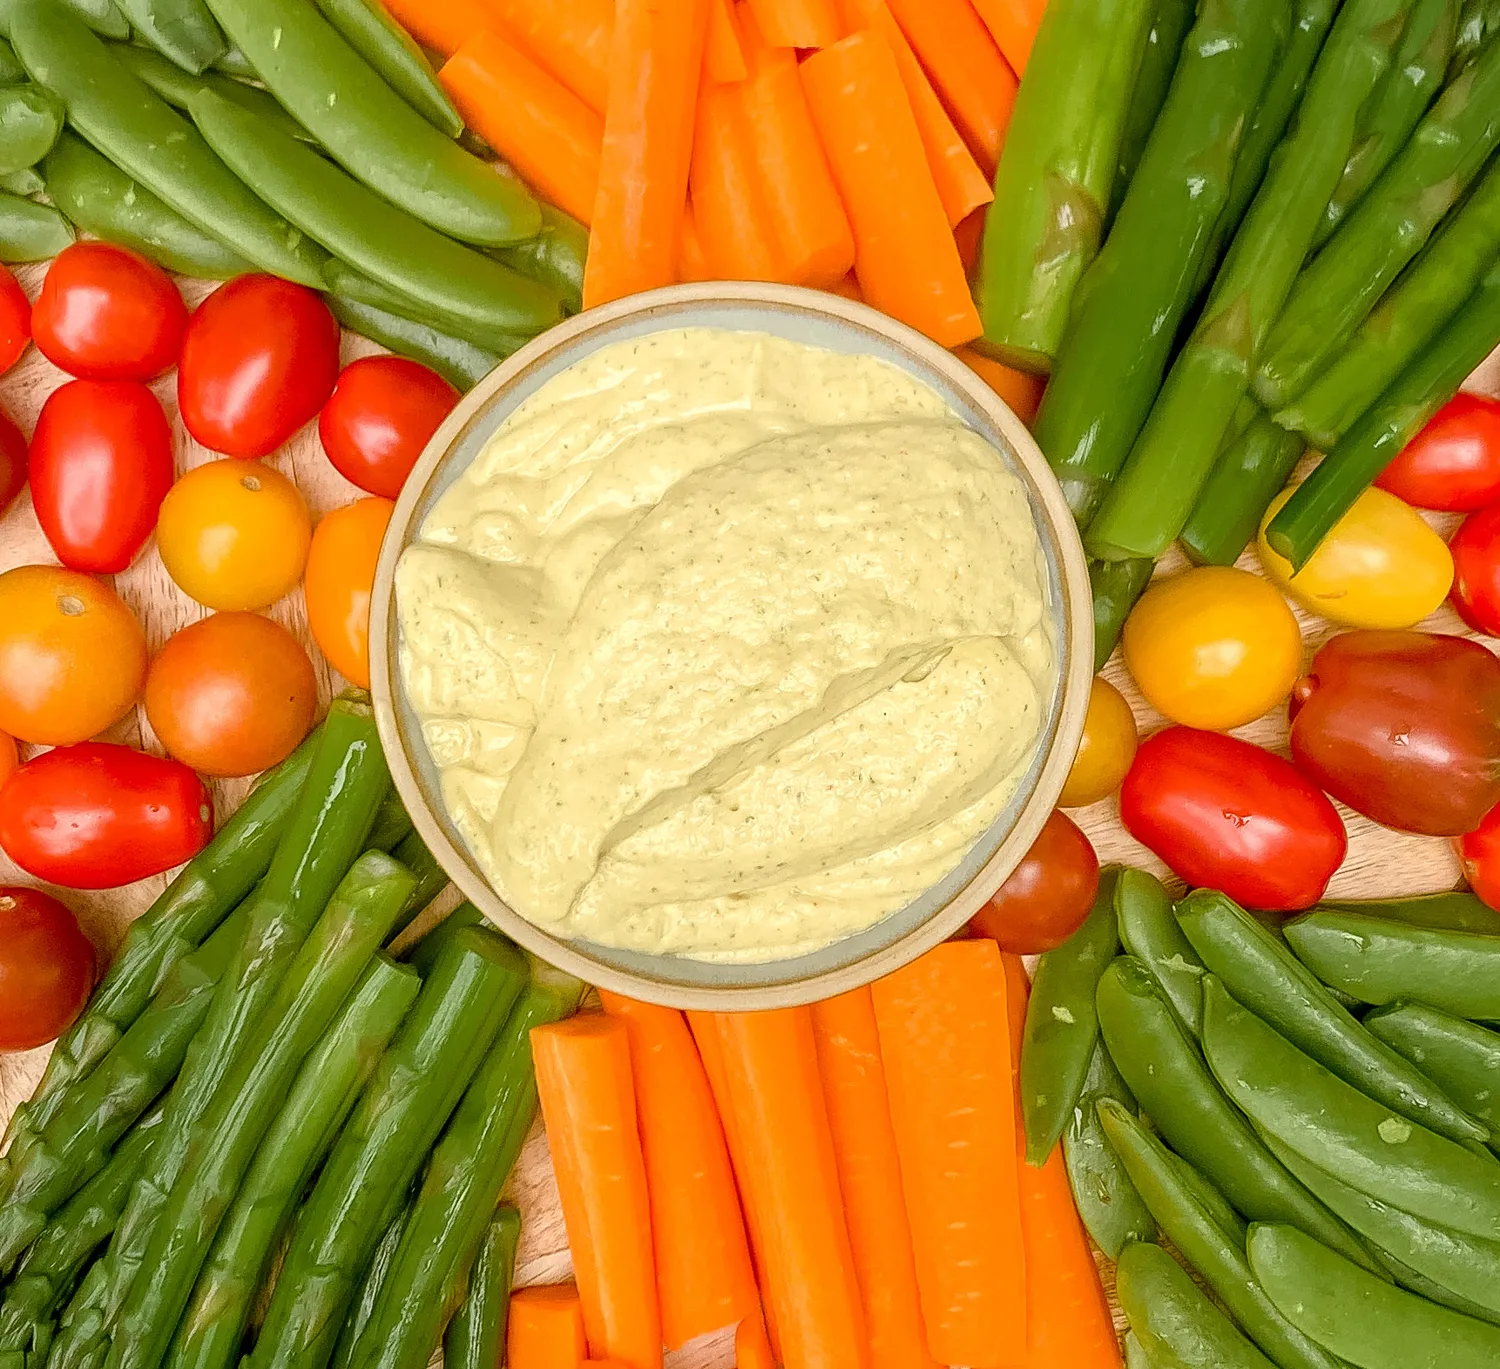 bored-with-ranch-use-miso-walnuts-and-pork-to-make-a-flavorful-veggie-dip